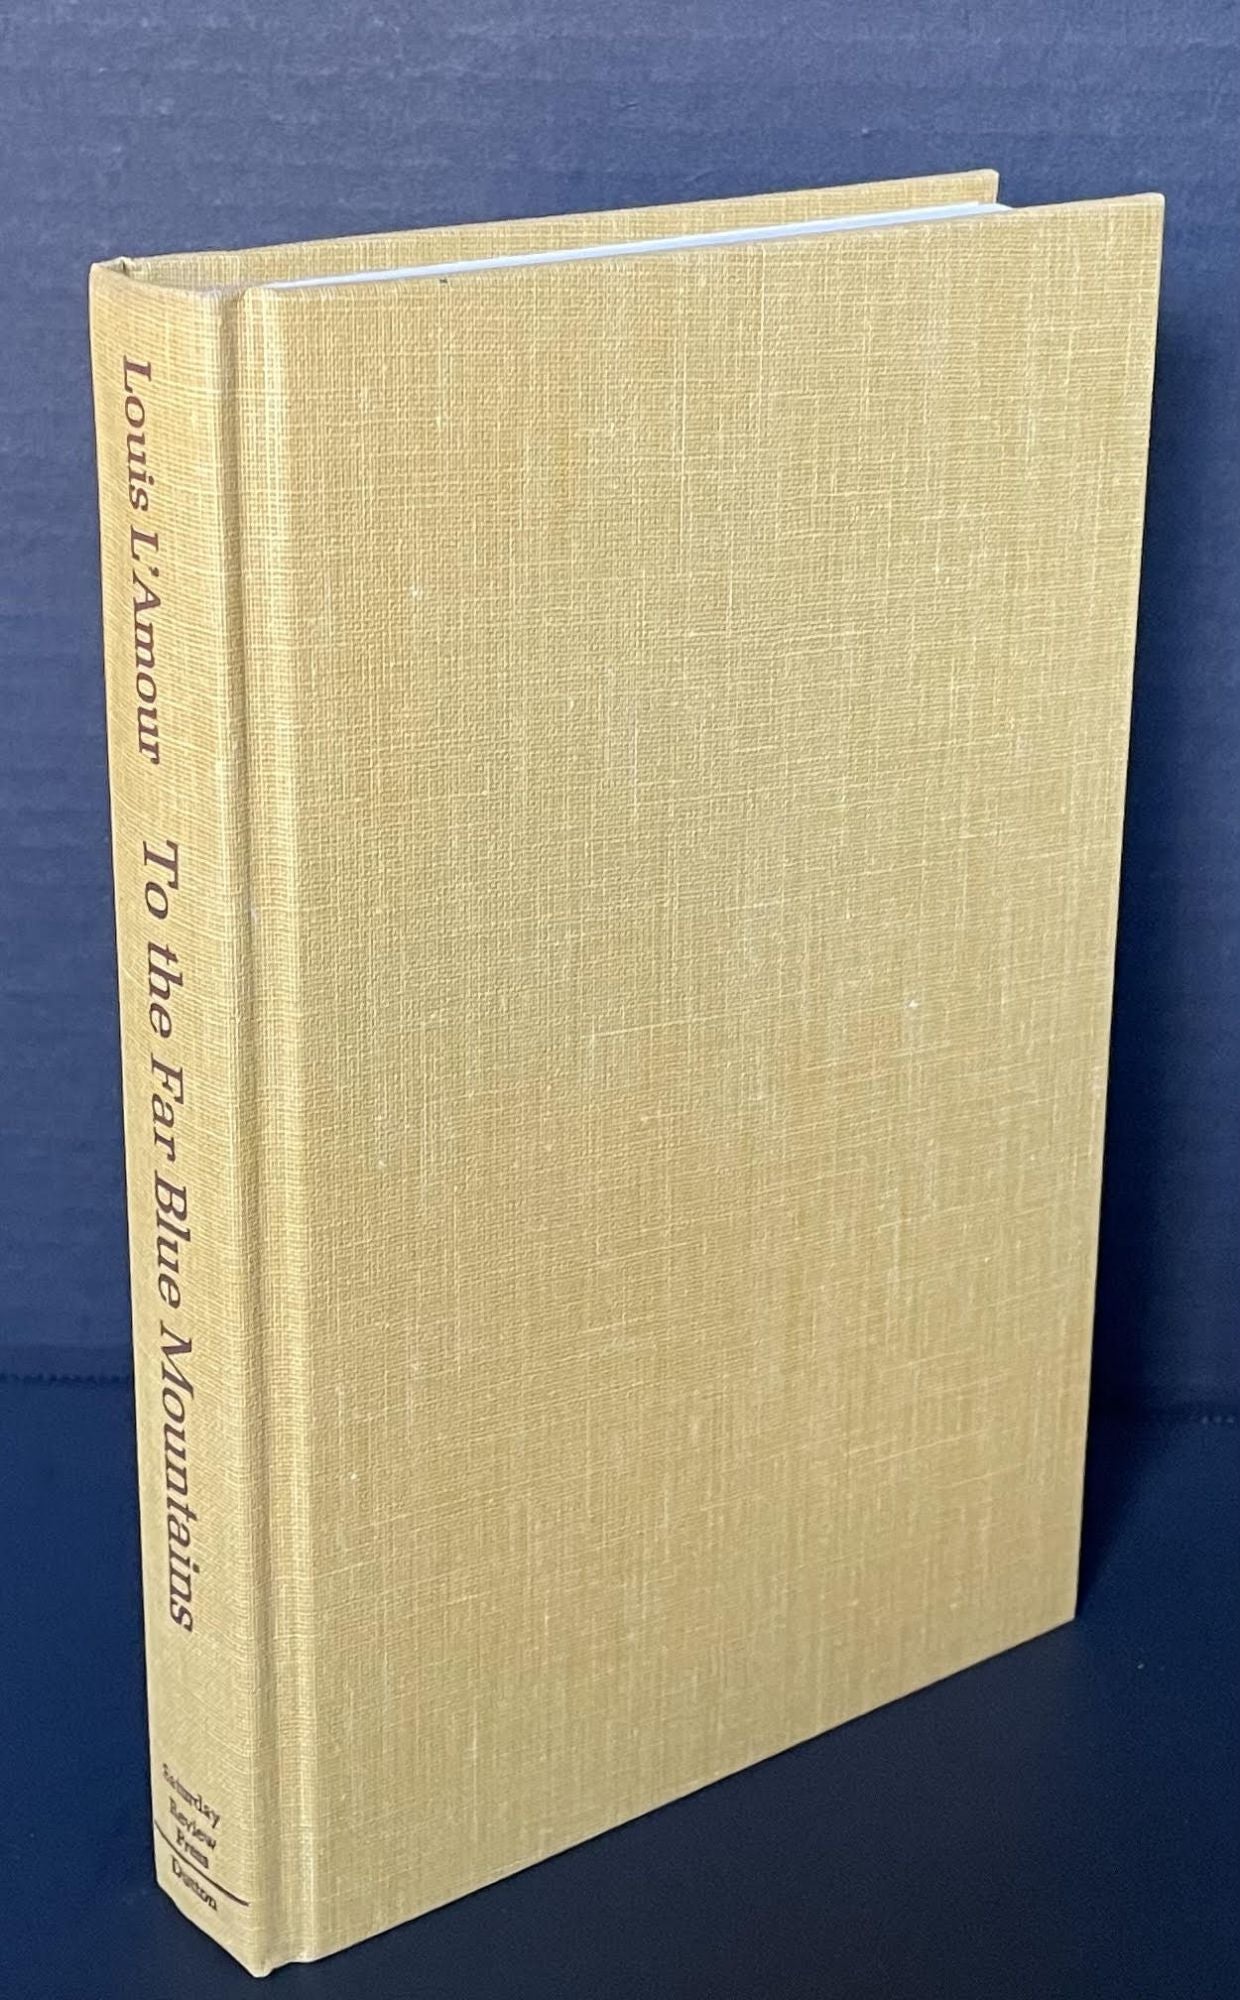 To the Far Blue Mountains by Louis L'Amour on Allington Antiquarian Books